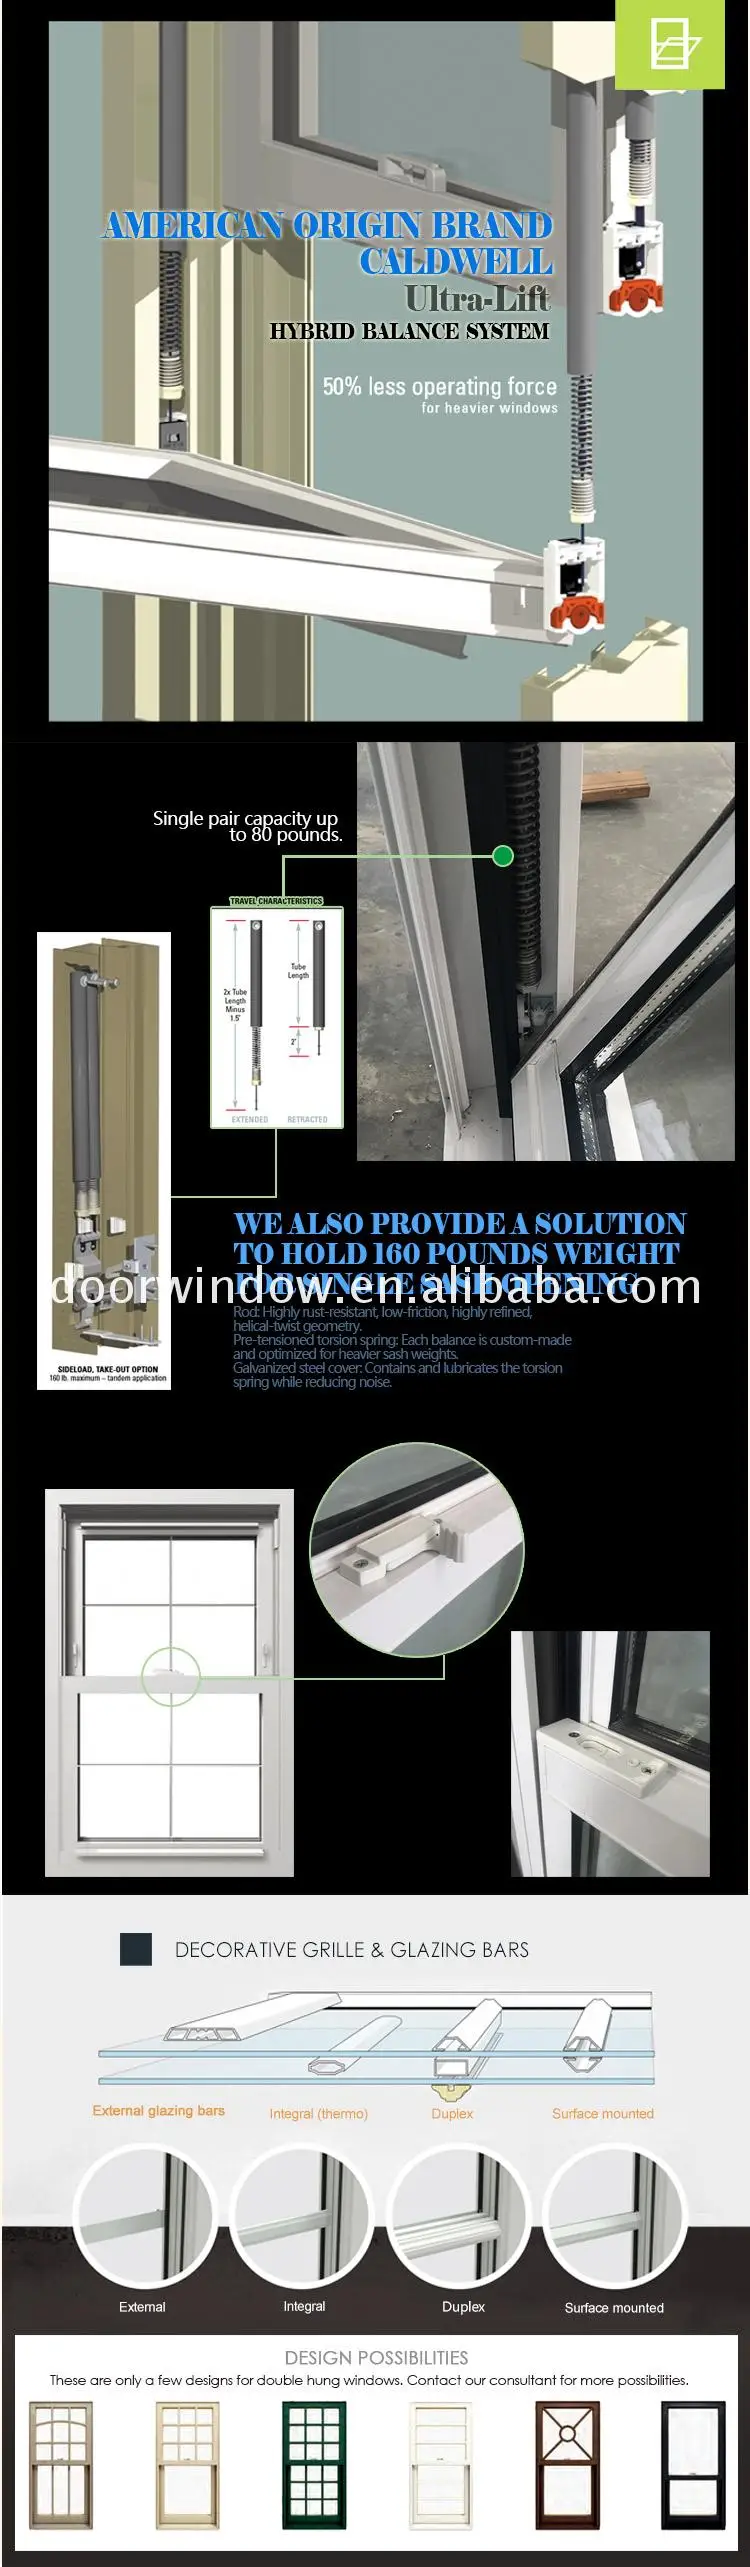 OEM who makes the best double hung windows white whats difference between single and